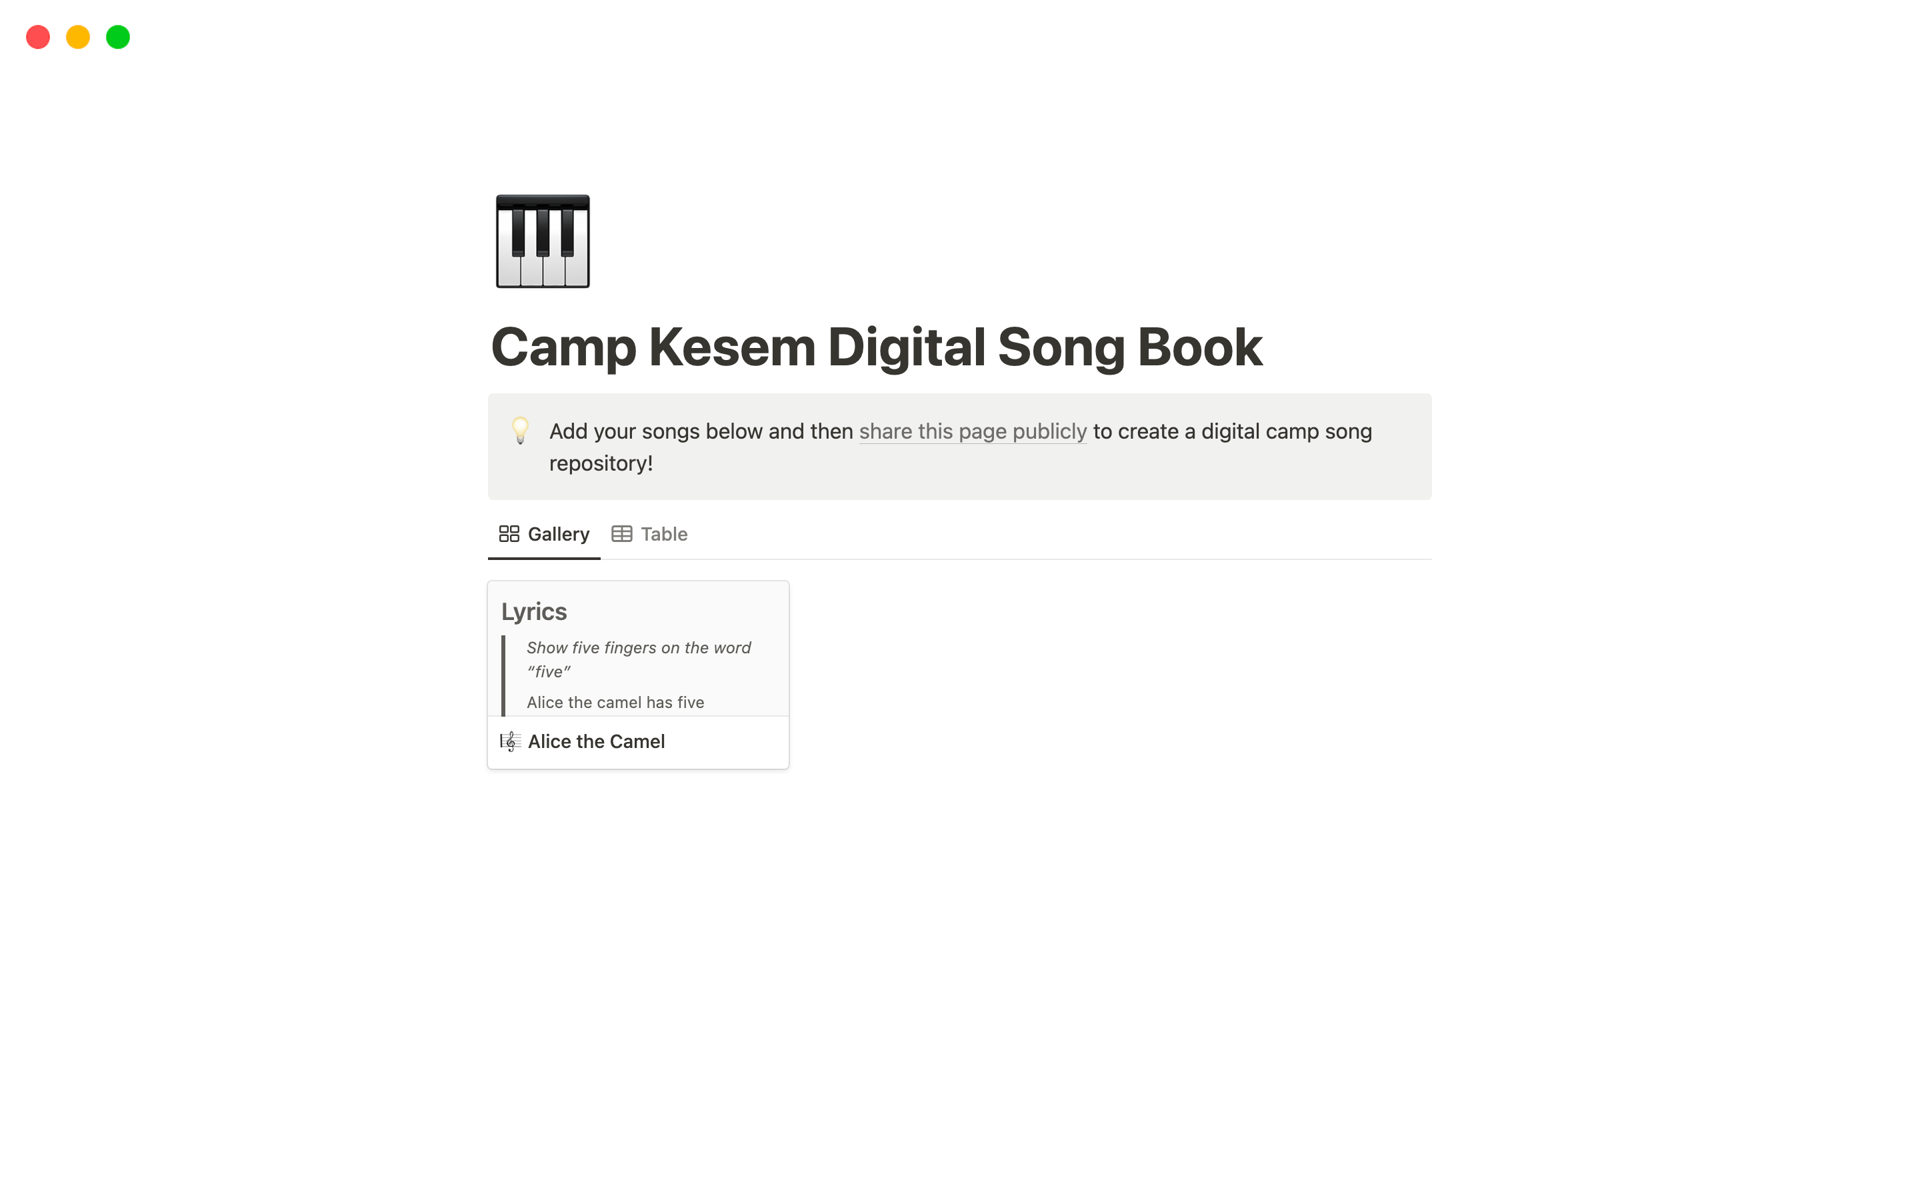 Add your camp songs to this template and then share this page publicly to create a digital camp song repository!